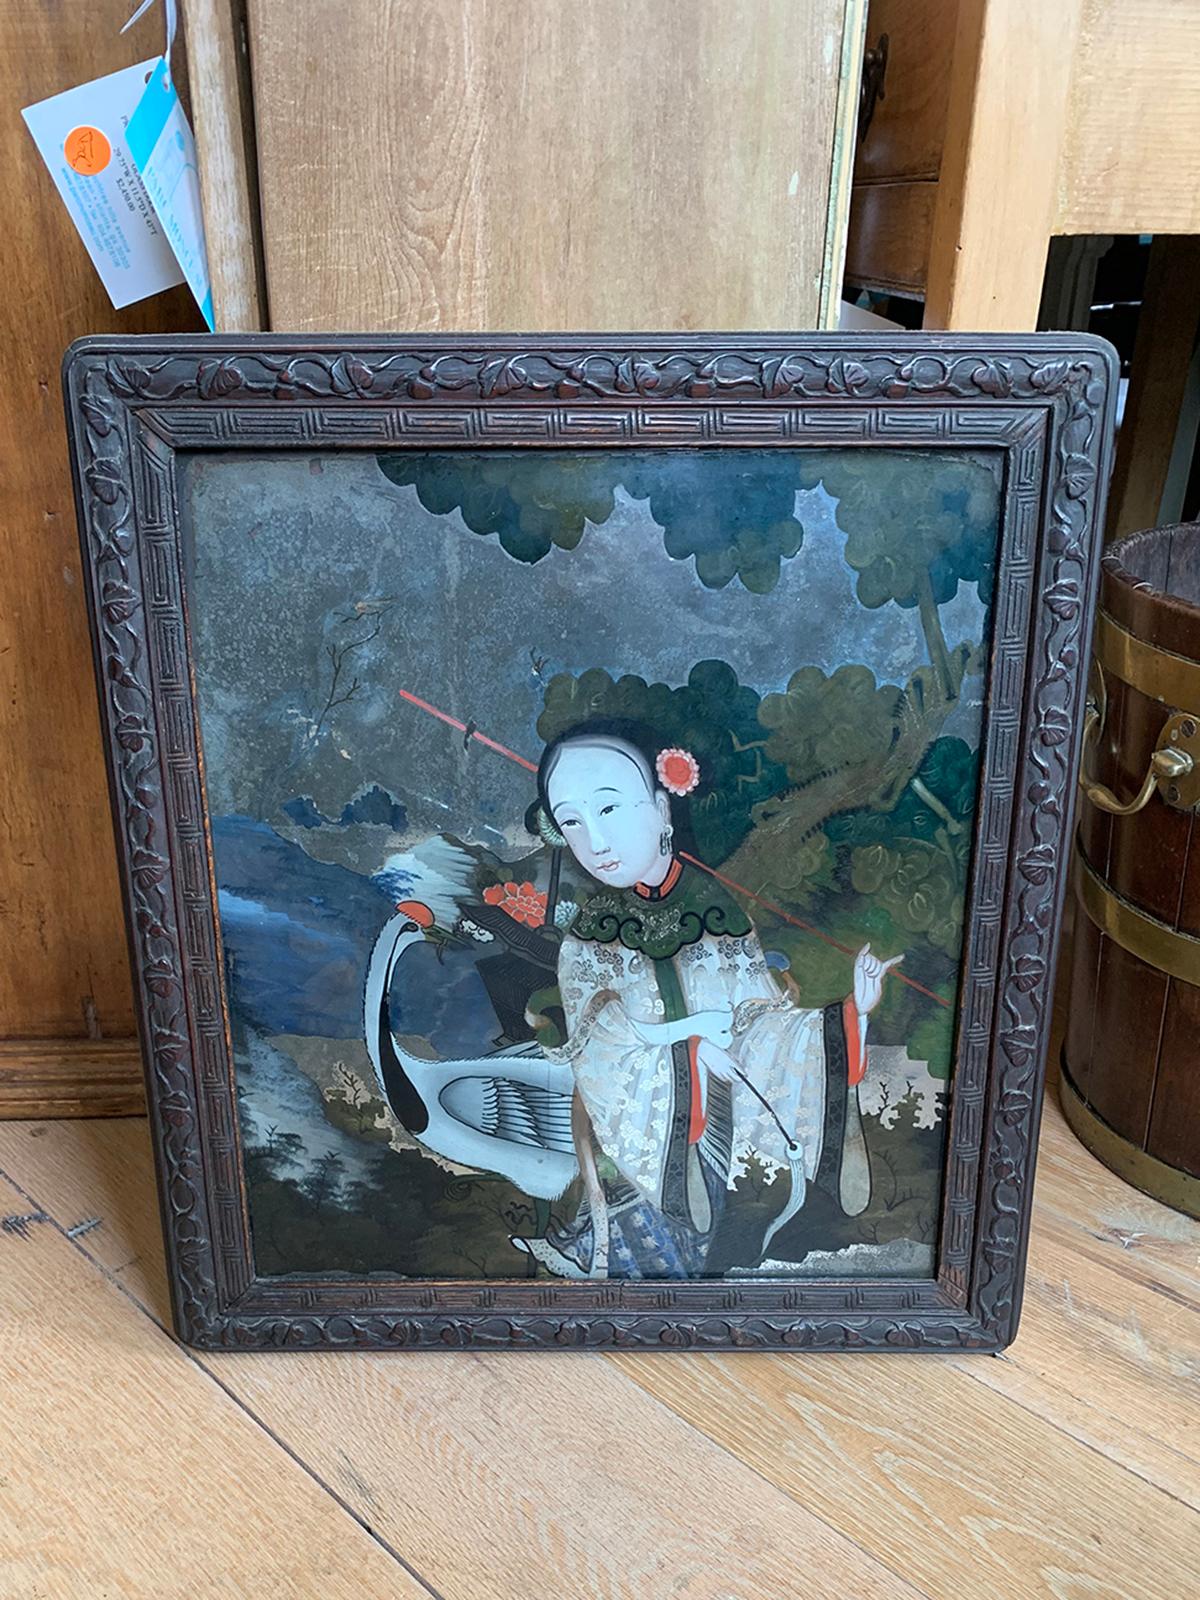 19th century to turn of the century Chinese framed églomisé portrait of woman.